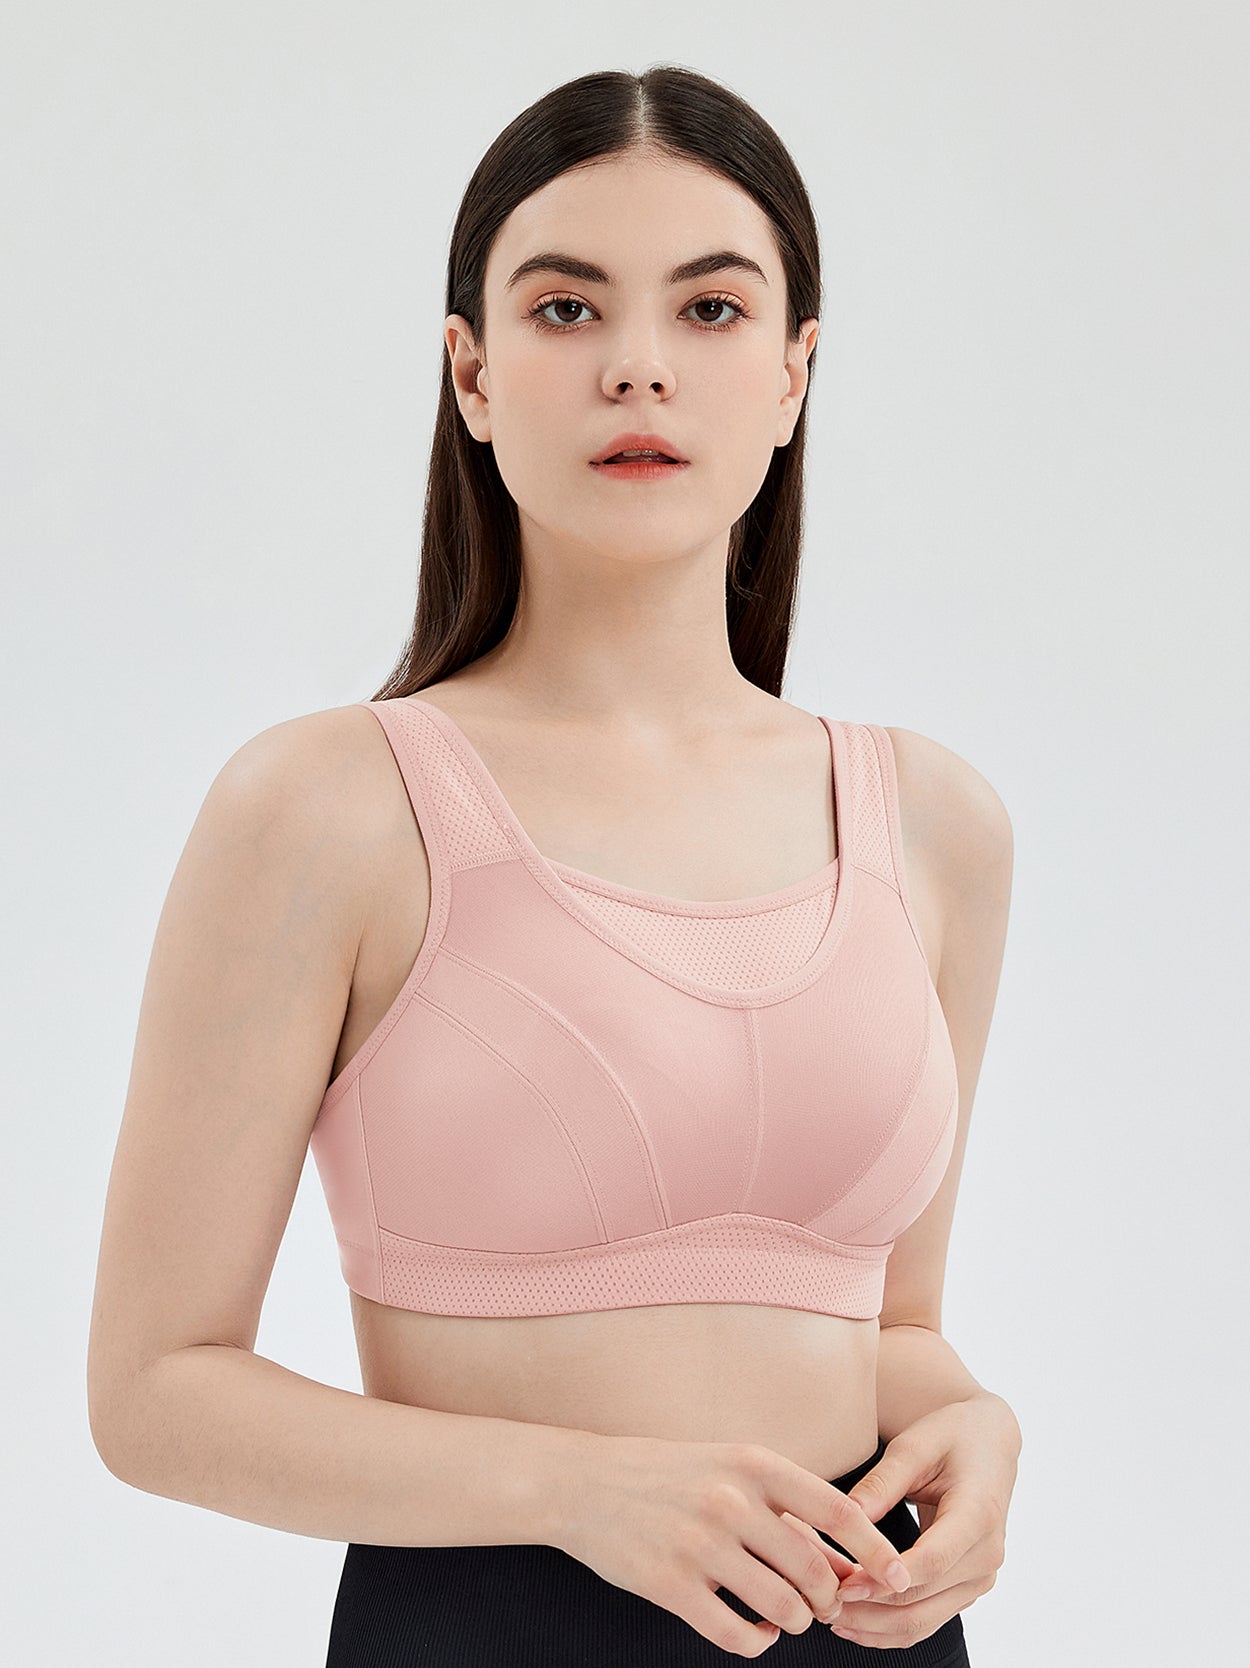 Cathalem Sports Bra for Big Busted Women High Impact High Impact